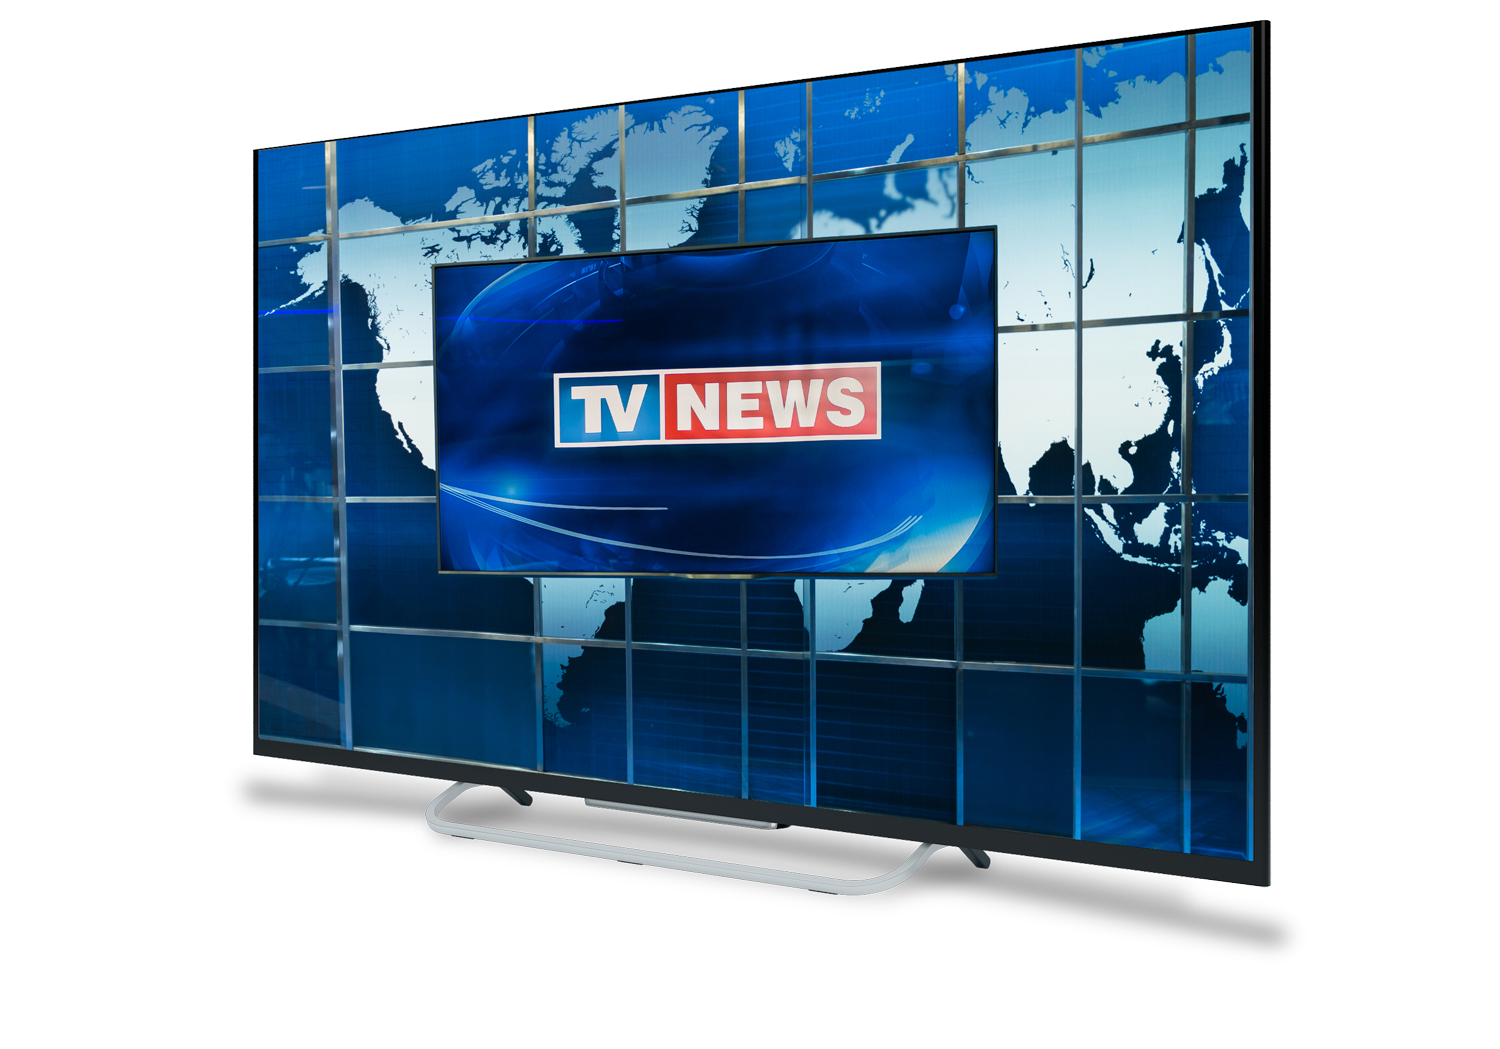 Television with graphic of the world map and TV NEWS in the middle